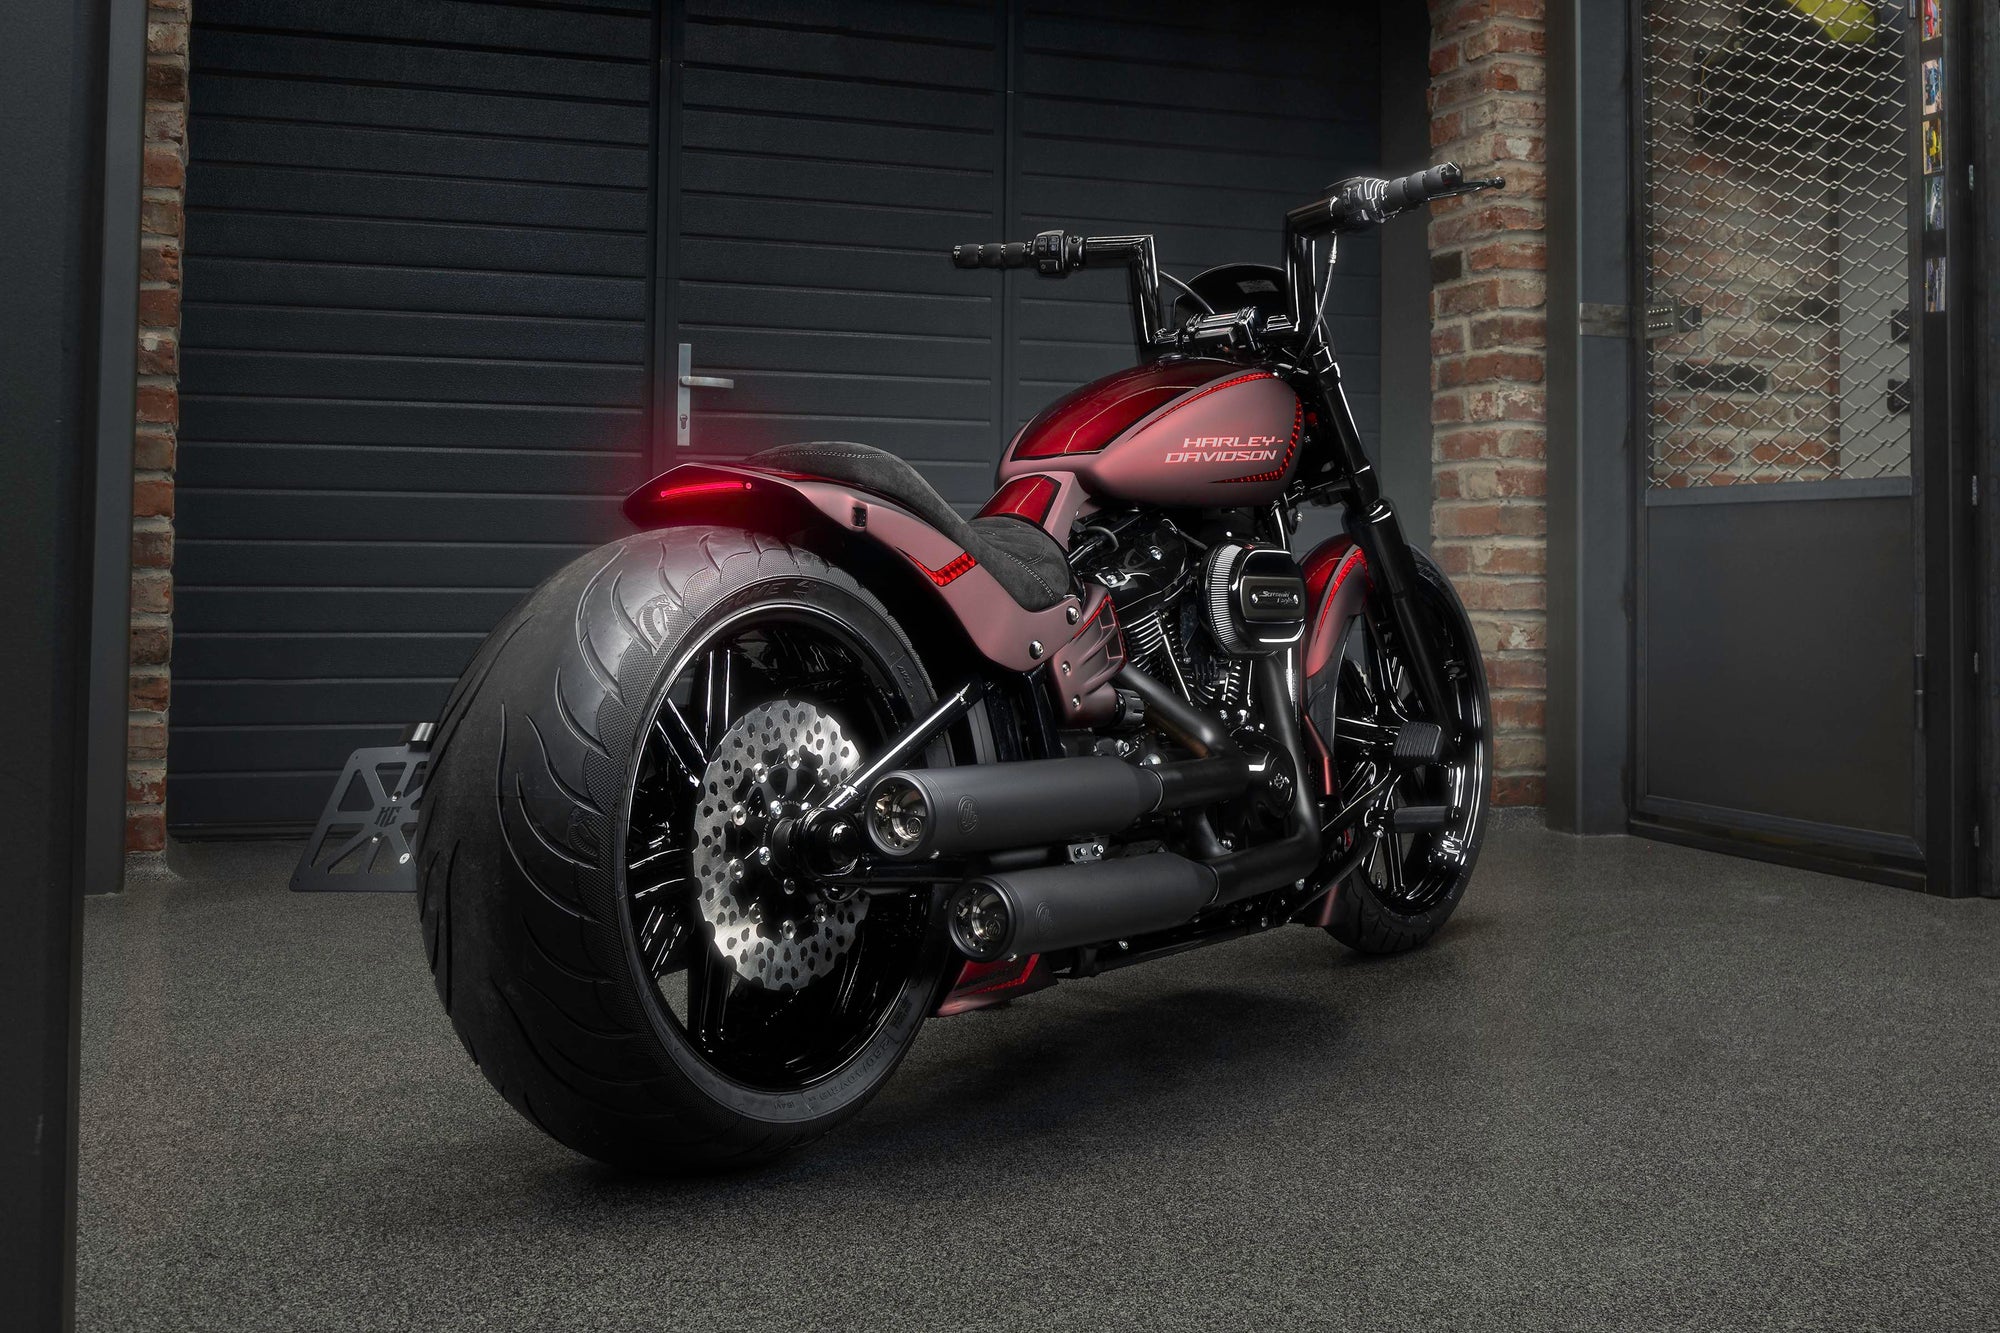  Modified Harley Davidson Breakout  motorcycle with Killer Custom parts from the rear in a modern garage